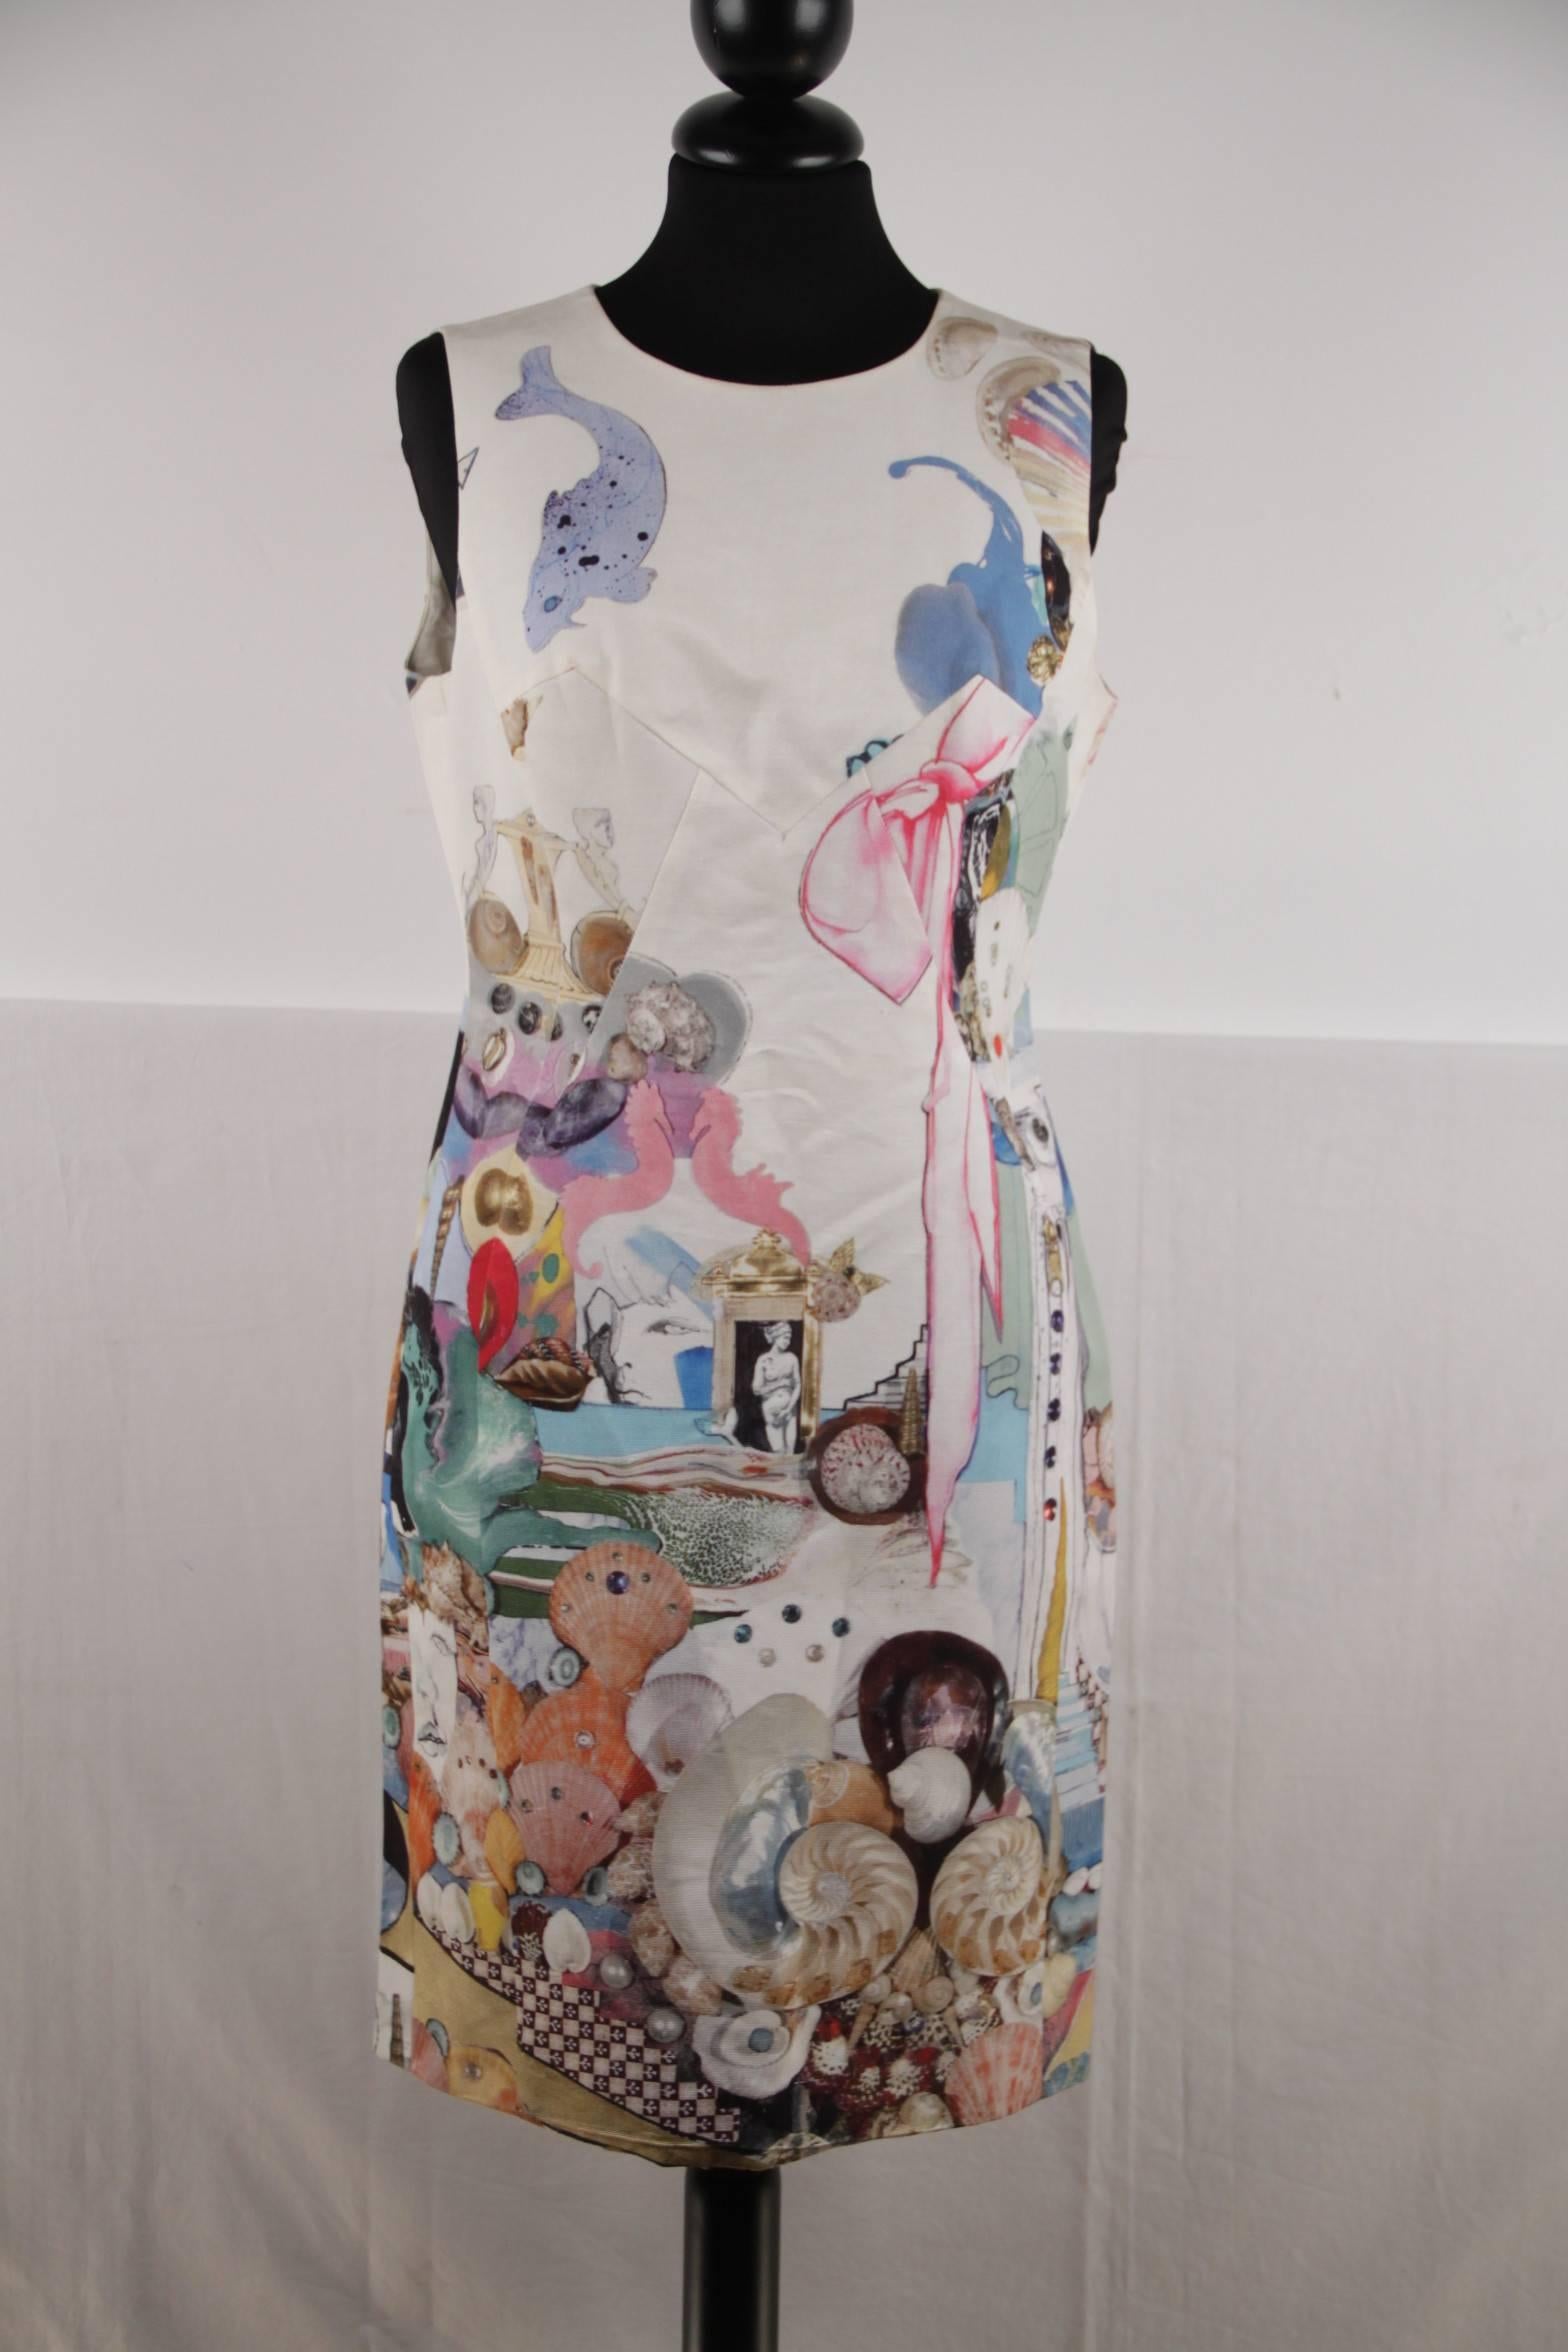  - Versace cotton blend sheath dress from the Spring/Summer 2009 collection

- Composition: 62% cotton, 38% viscose

- Sleeveless styling

- Multicolored print on white background

- Round neckline

- Lined

- Rear zip closure

-